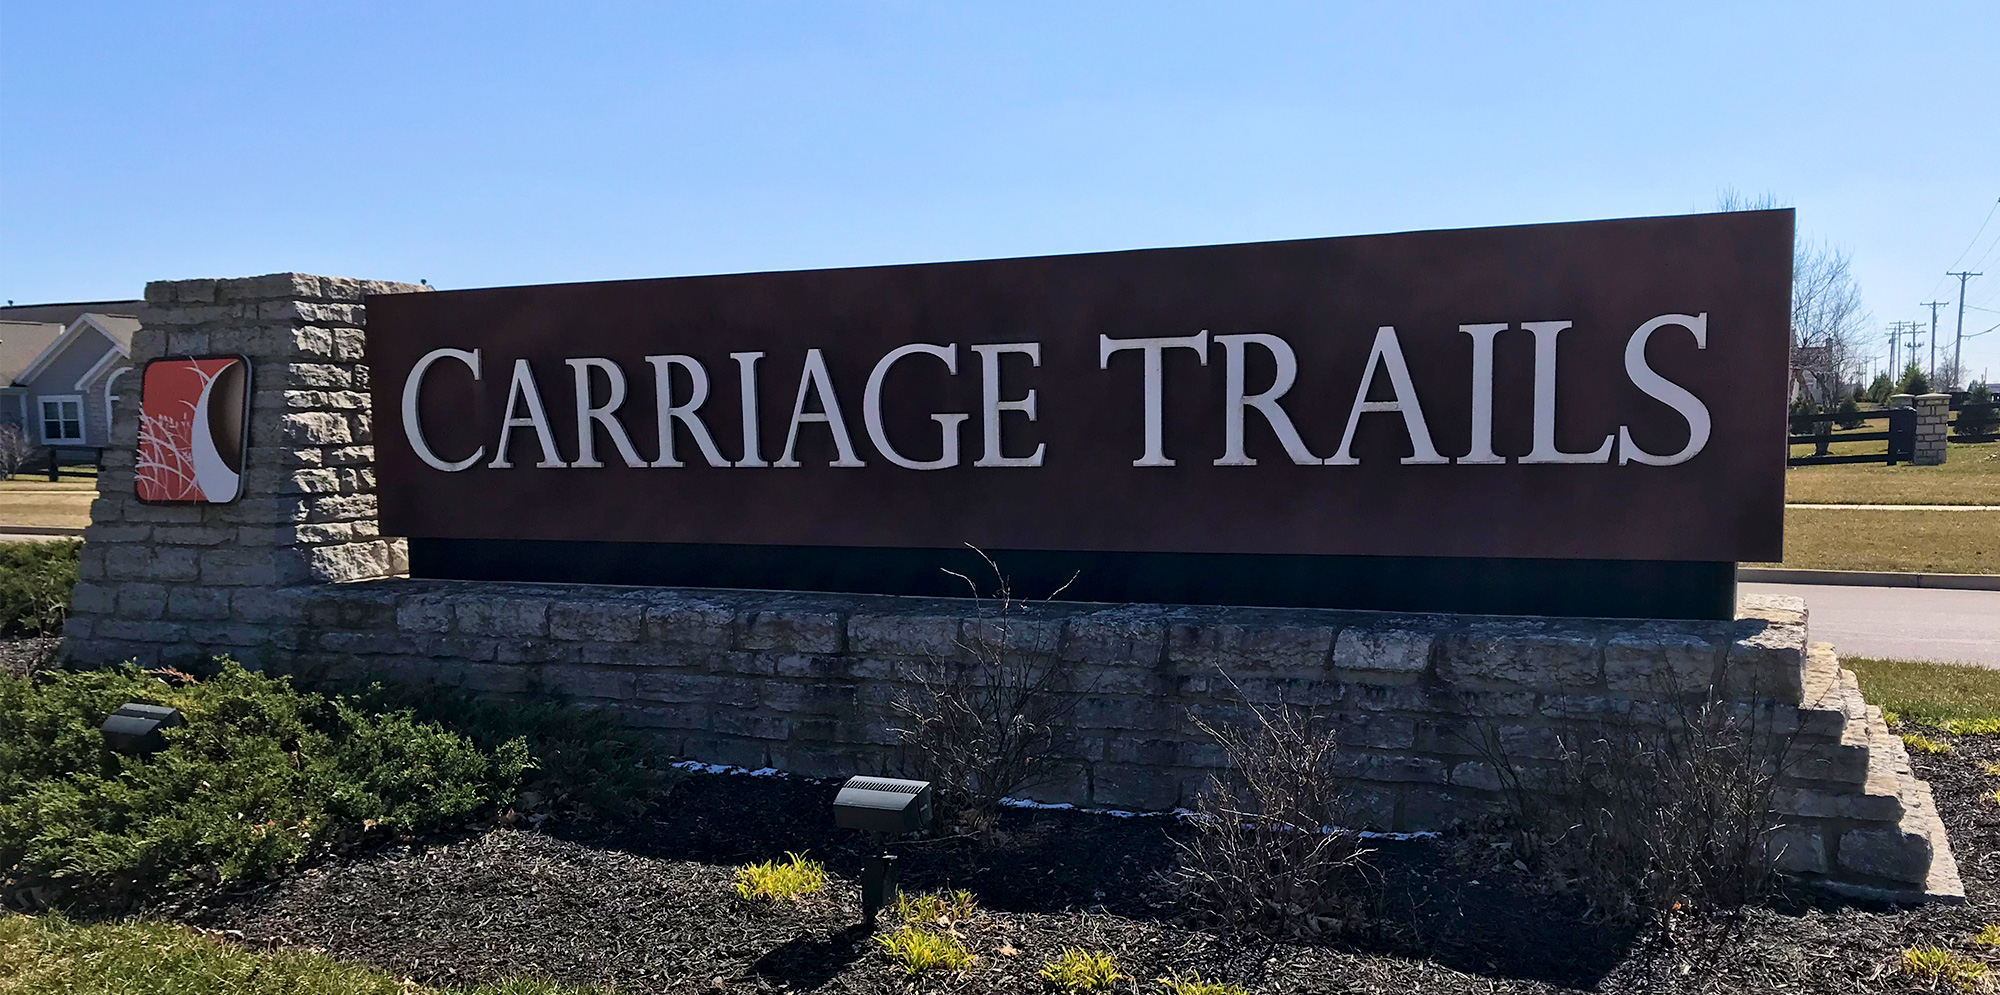 Carriage Trails sign near Dayton Ohio. Designed and planned by IBI Group